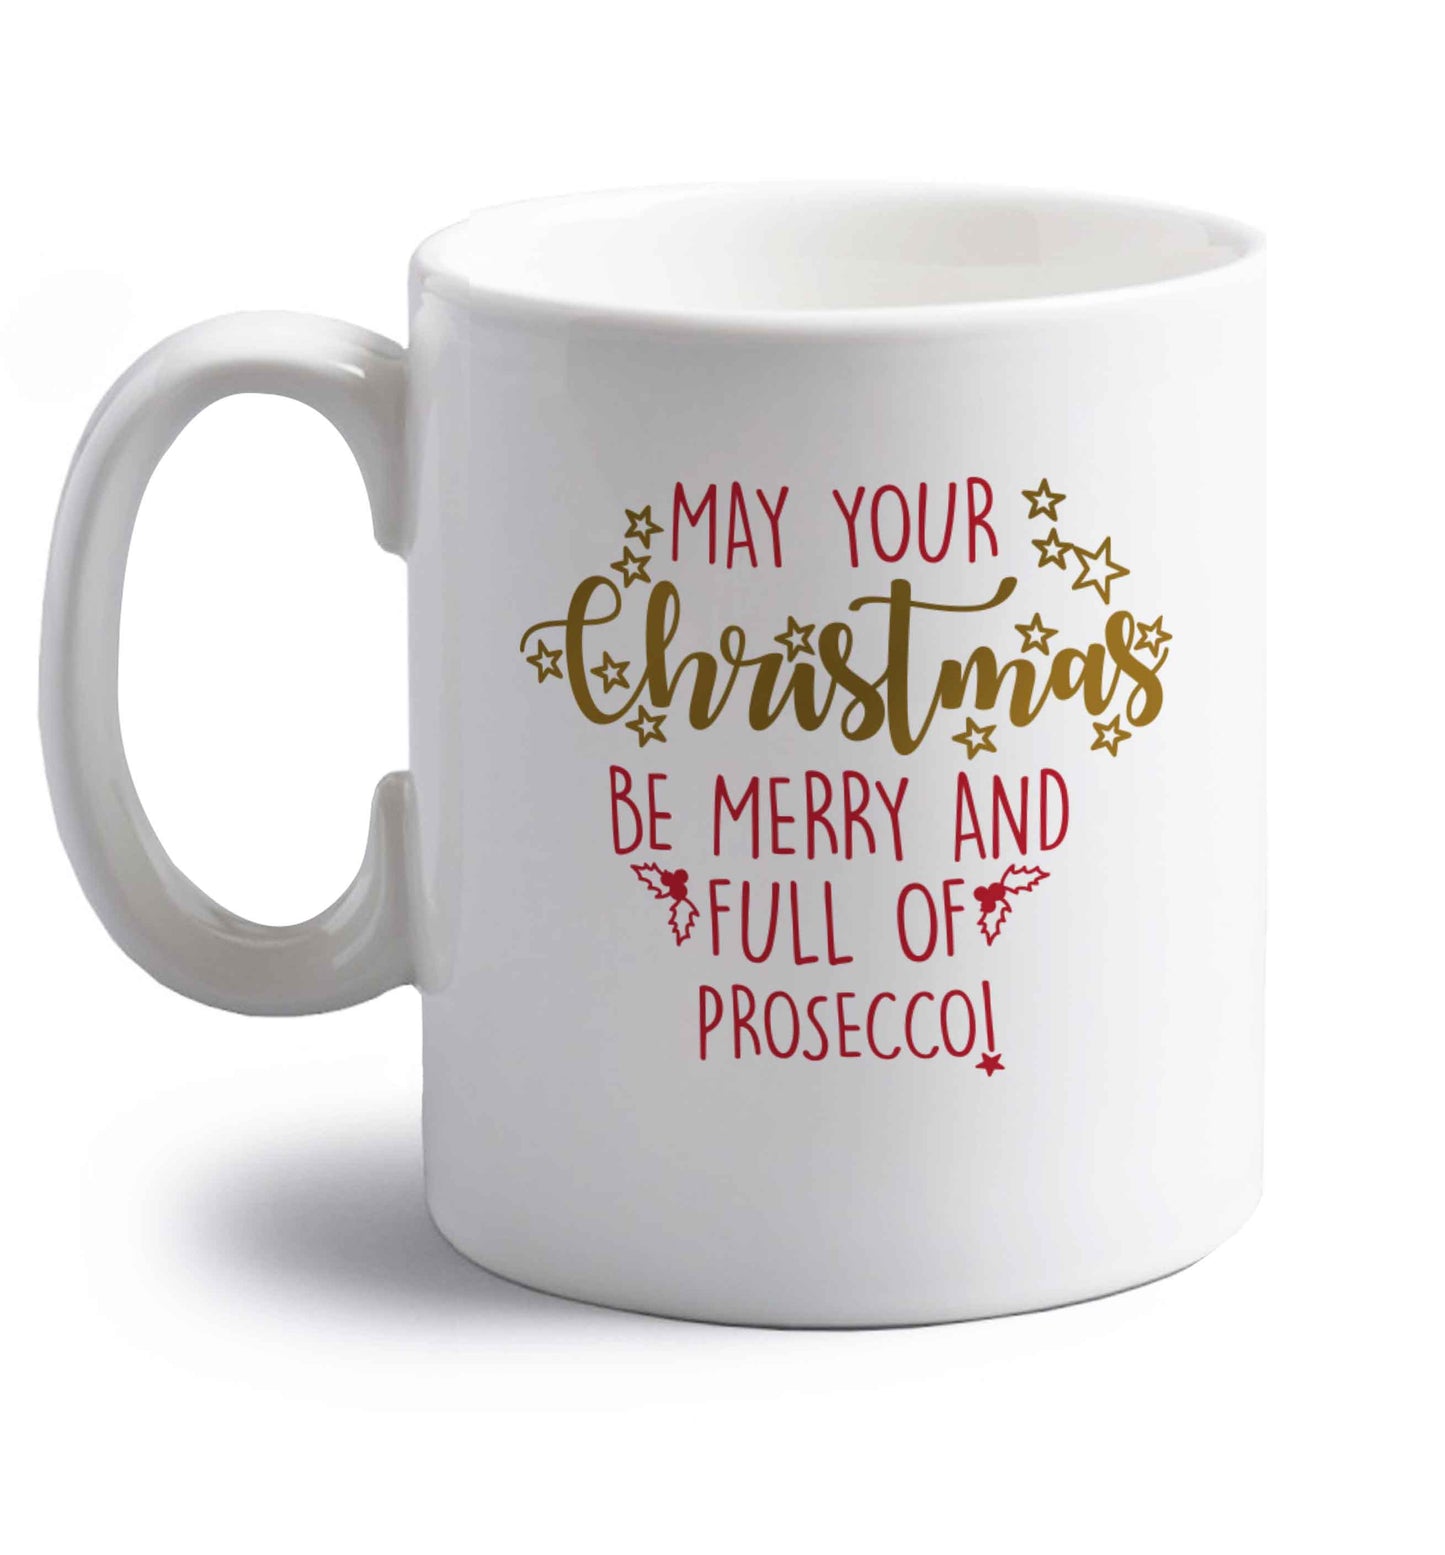 May your Christmas be merry and full of prosecco right handed white ceramic mug 